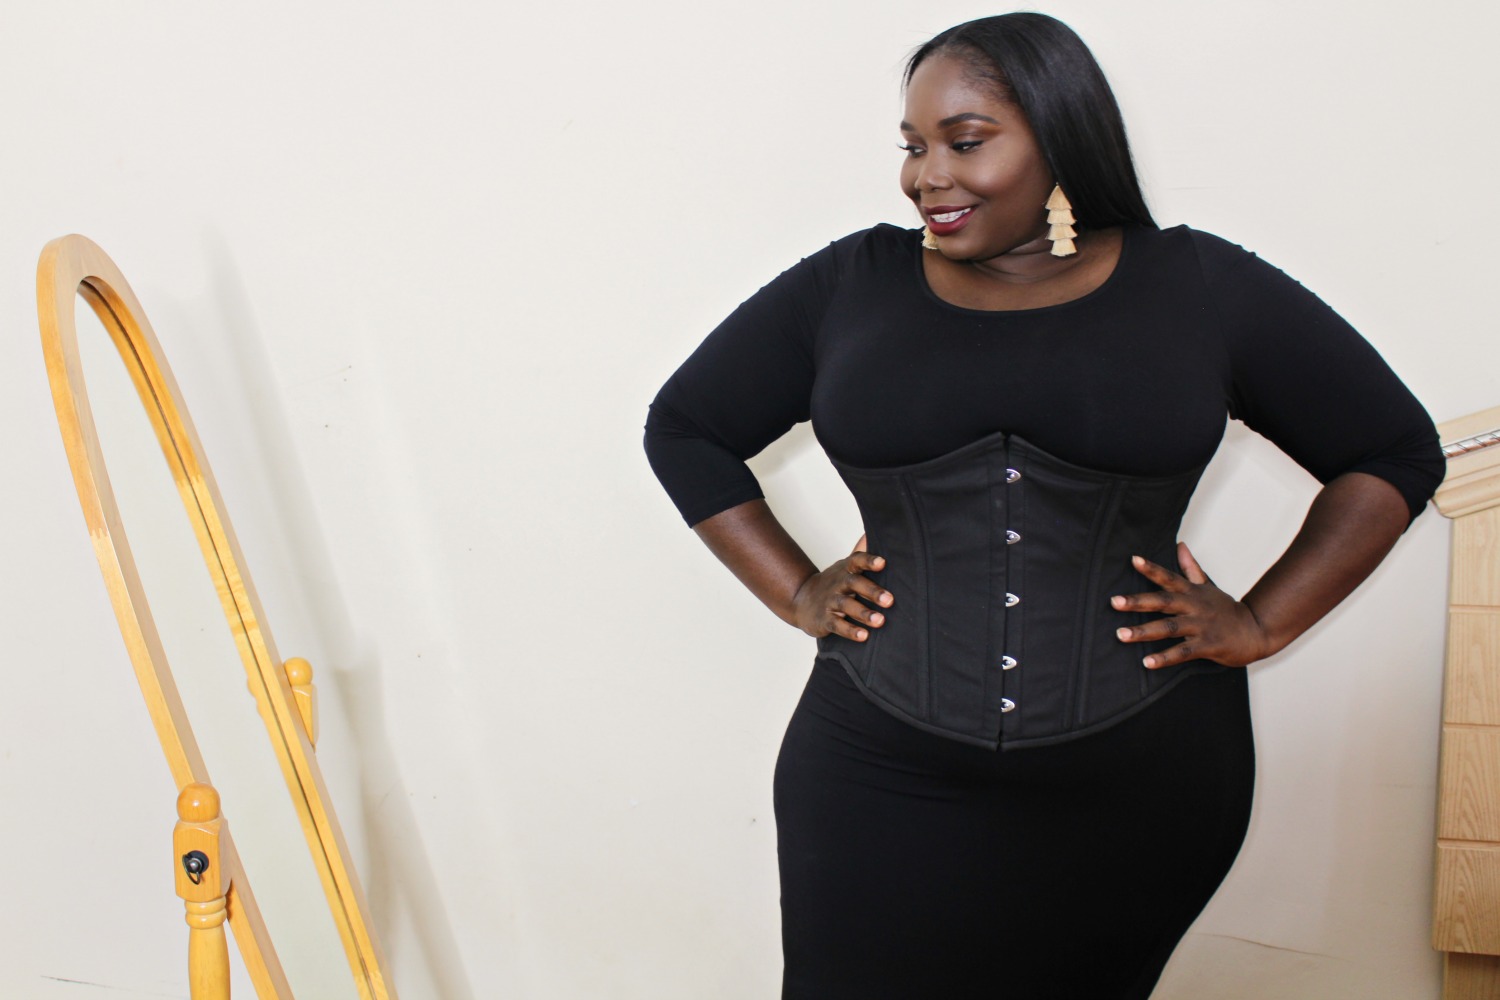 Ladies we CAN wear corsets too! Here's how I'd style mine🤍 #plussizes, corset style